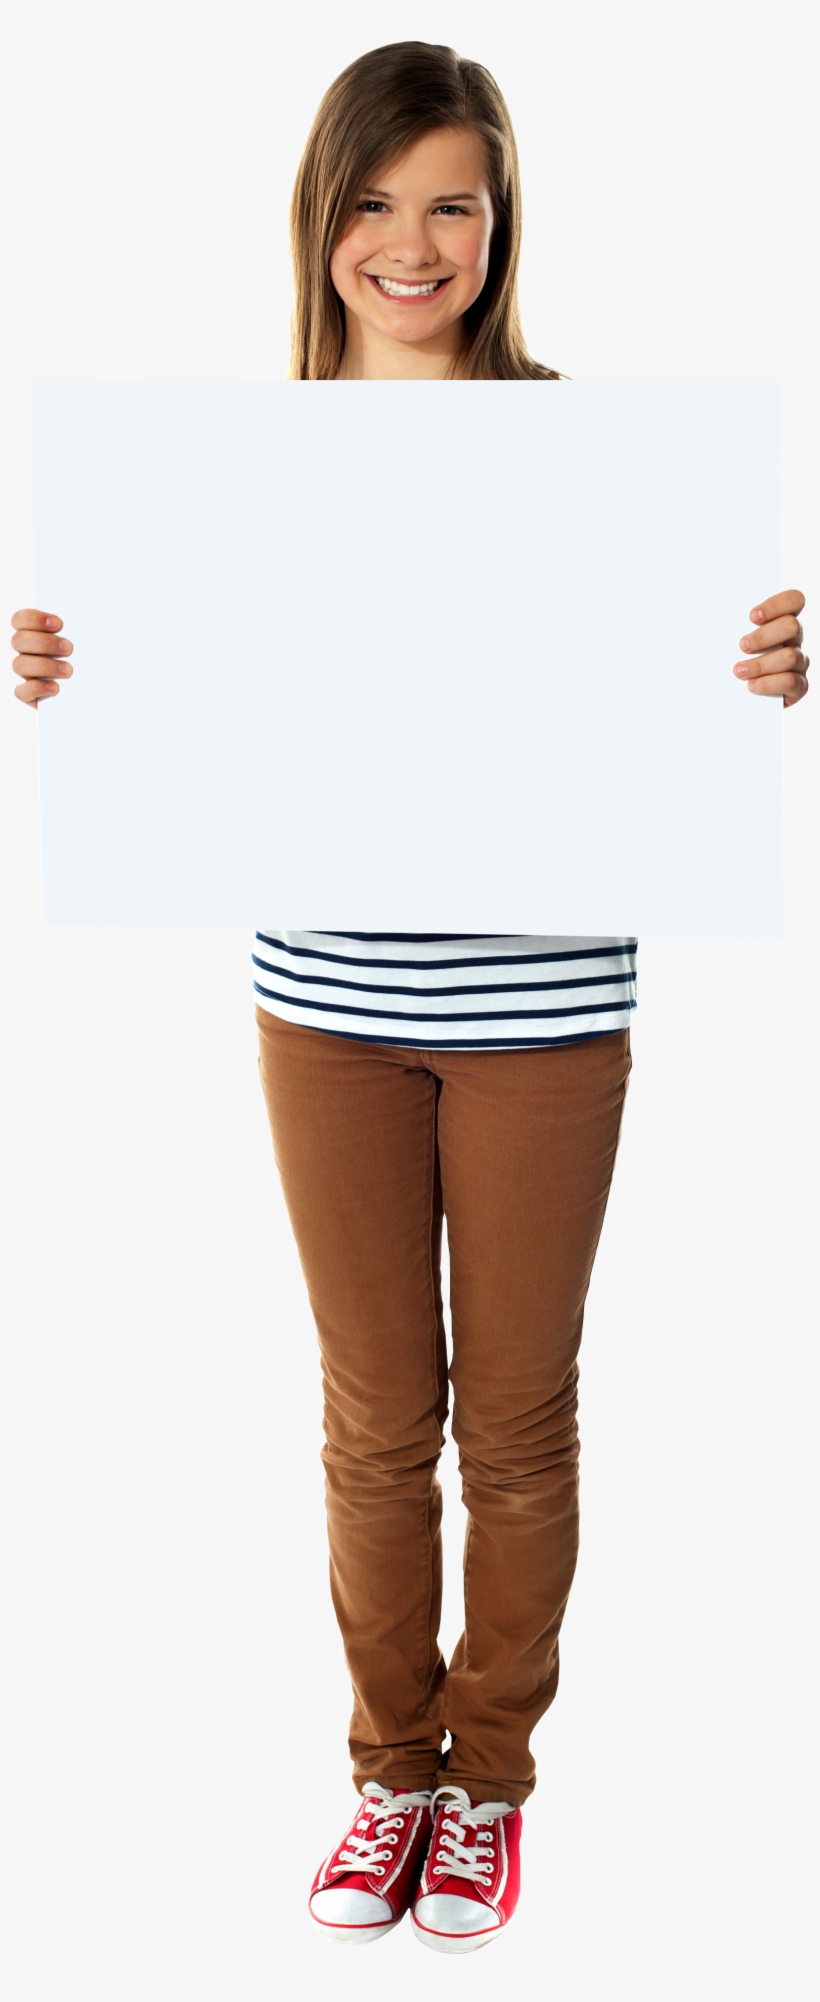 Girl Holding Banner Png Image - Portable Network Graphics, transparent png #3627898